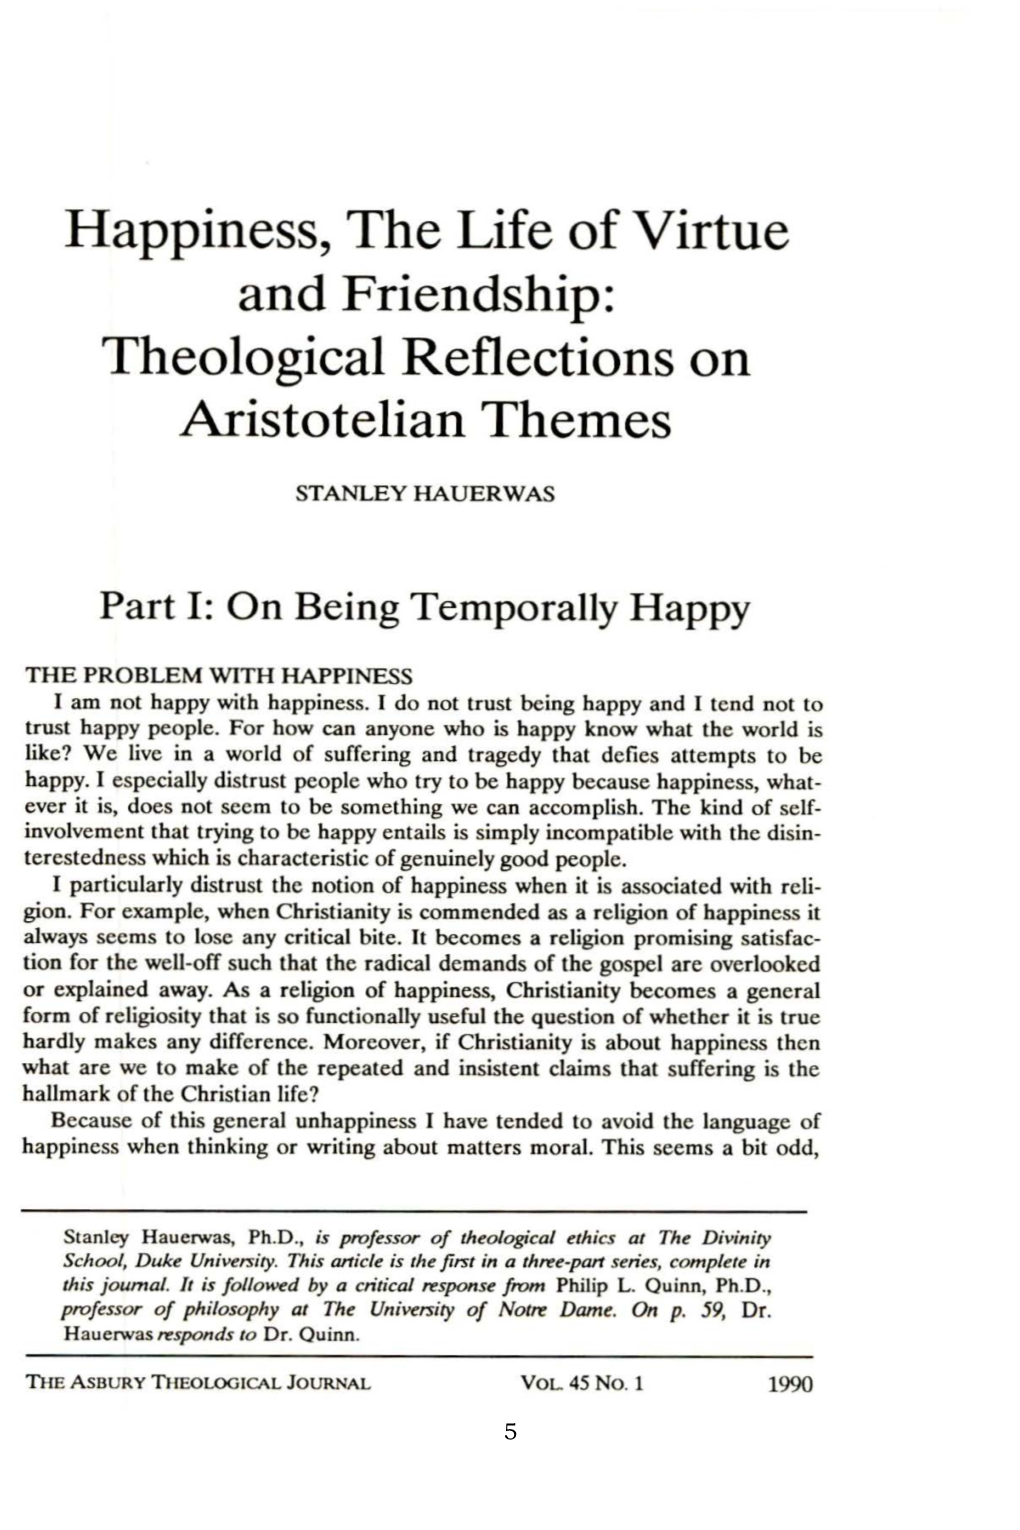 Happiness, the Life of Virtue and Friendship: Theological Reflections on Aristotelian Themes